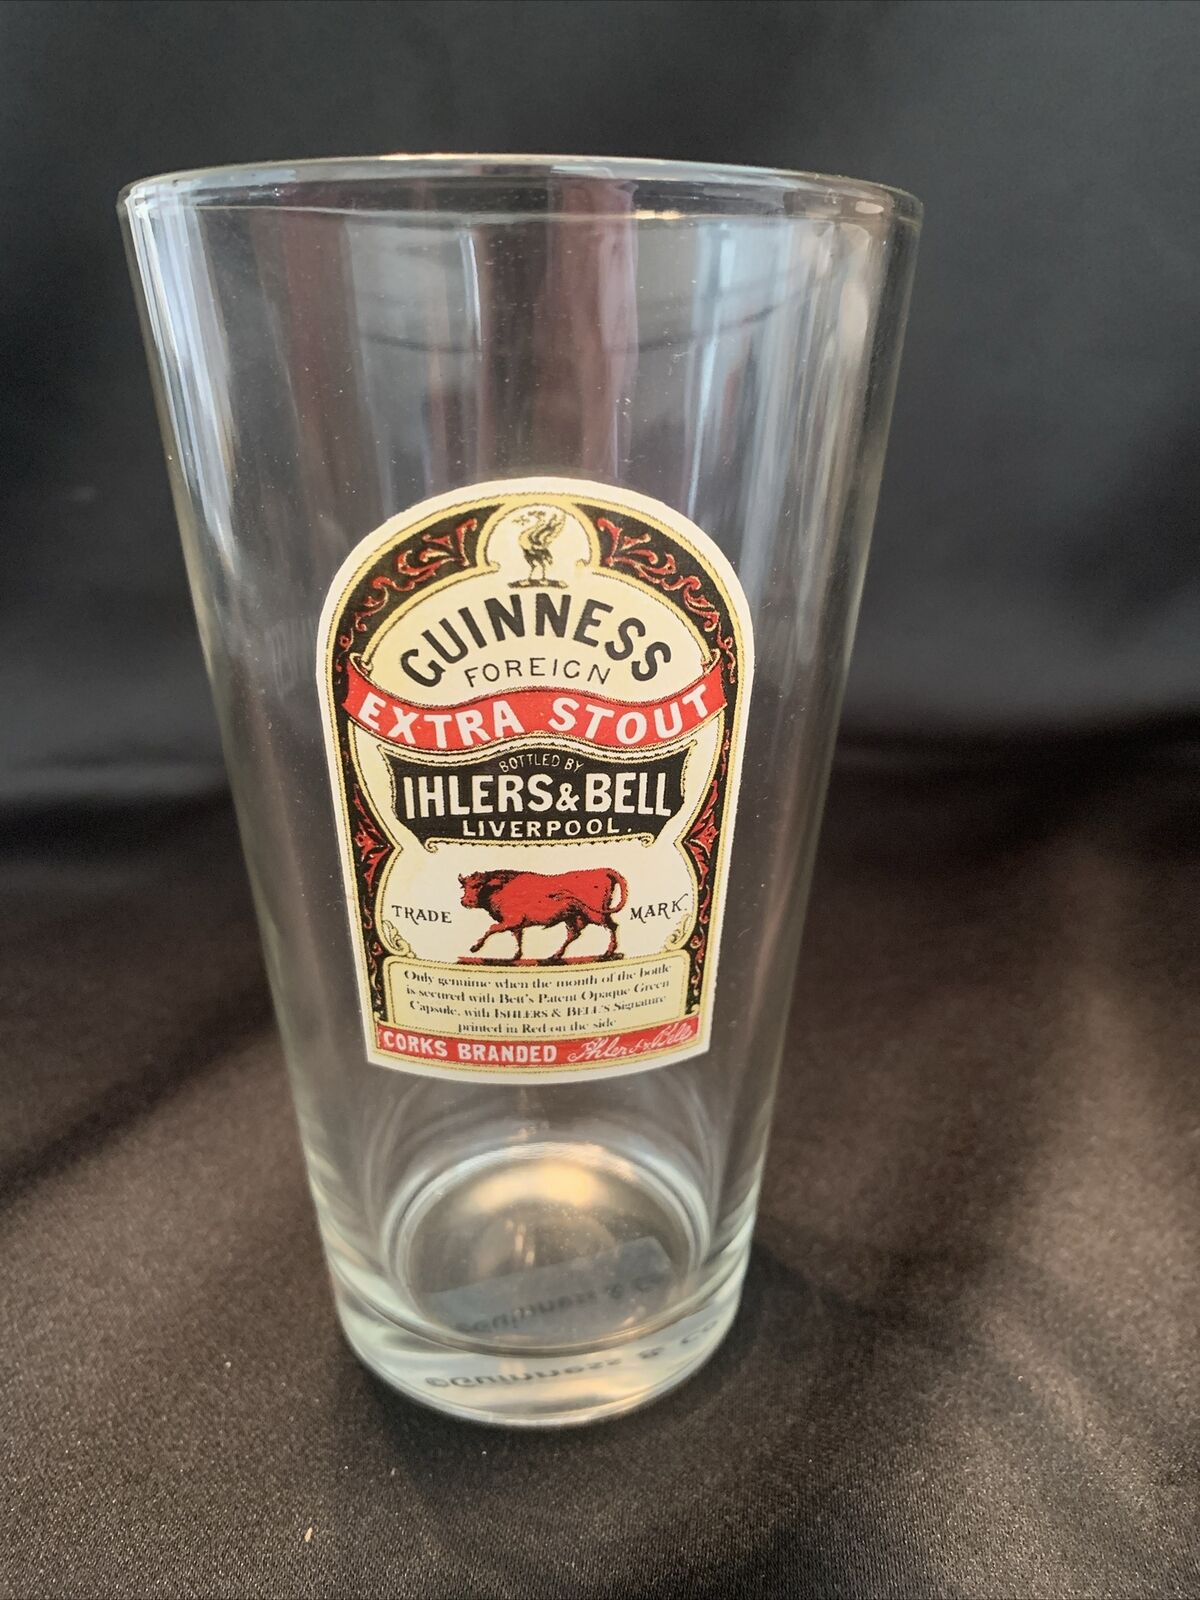 Guinness Foreign Extra Stout Ihlers & Bell Bottling Beer Ale Pint Glass